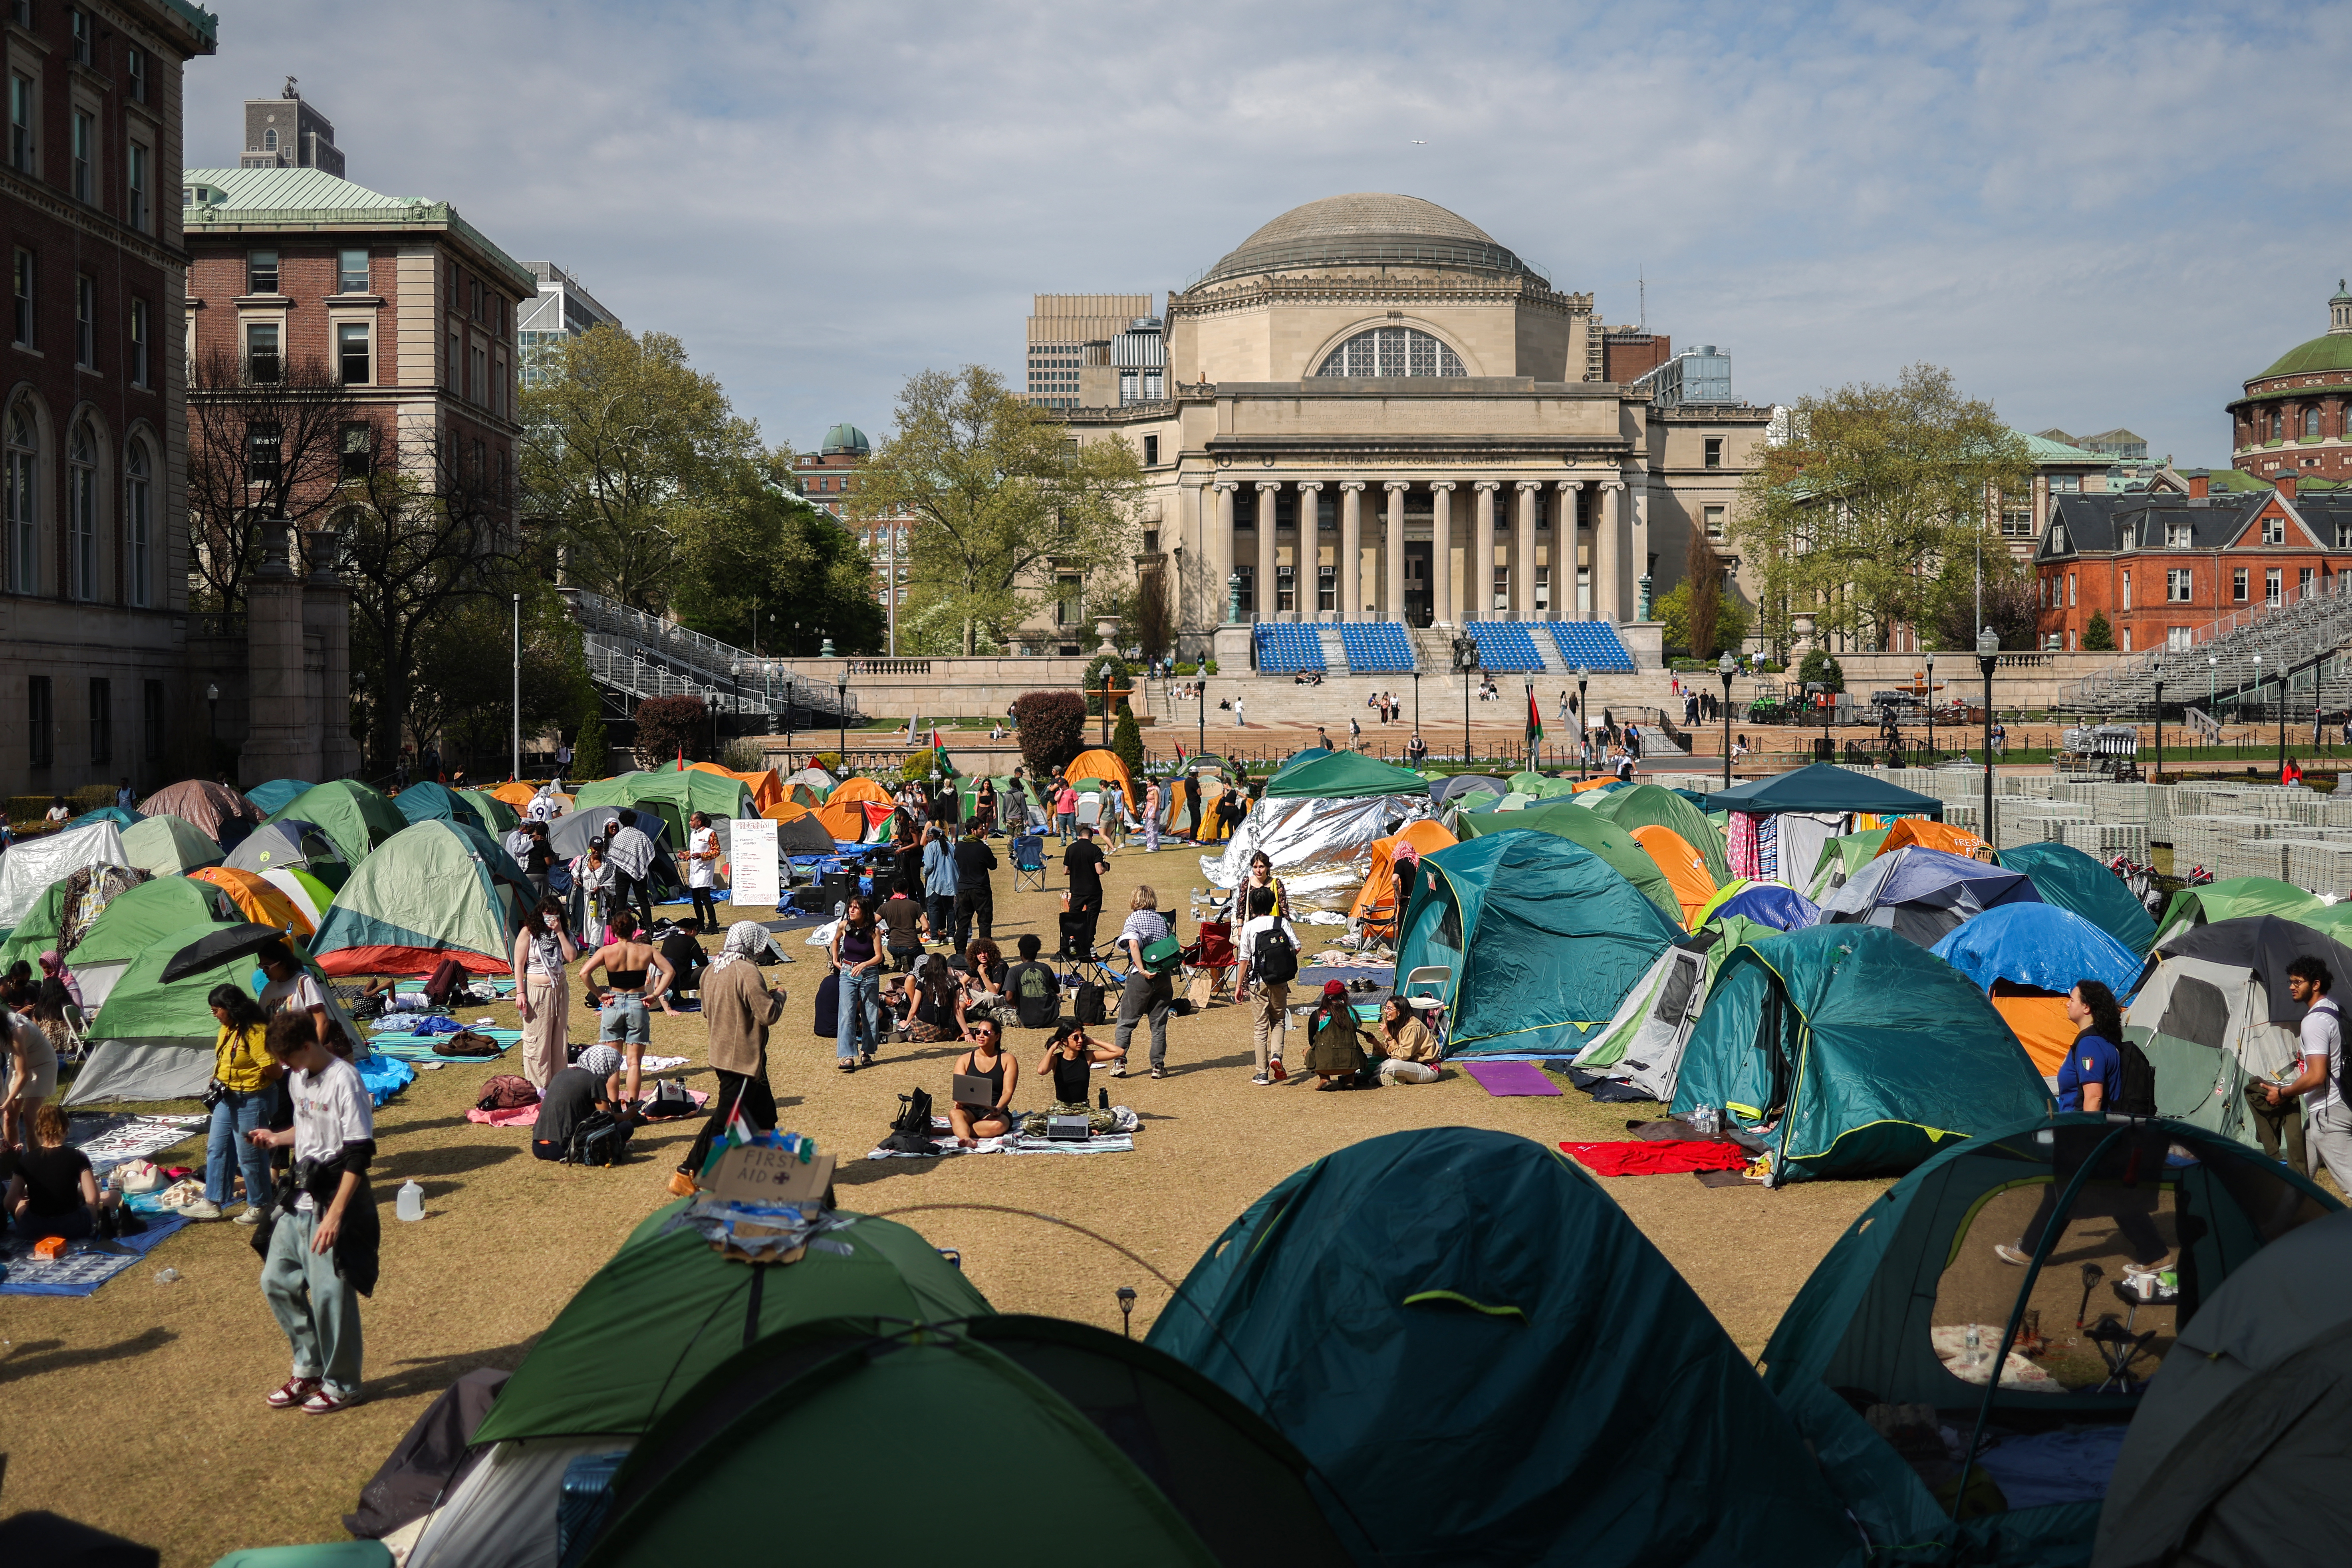 Columbia University president: talks between school and protesters are at an impasse